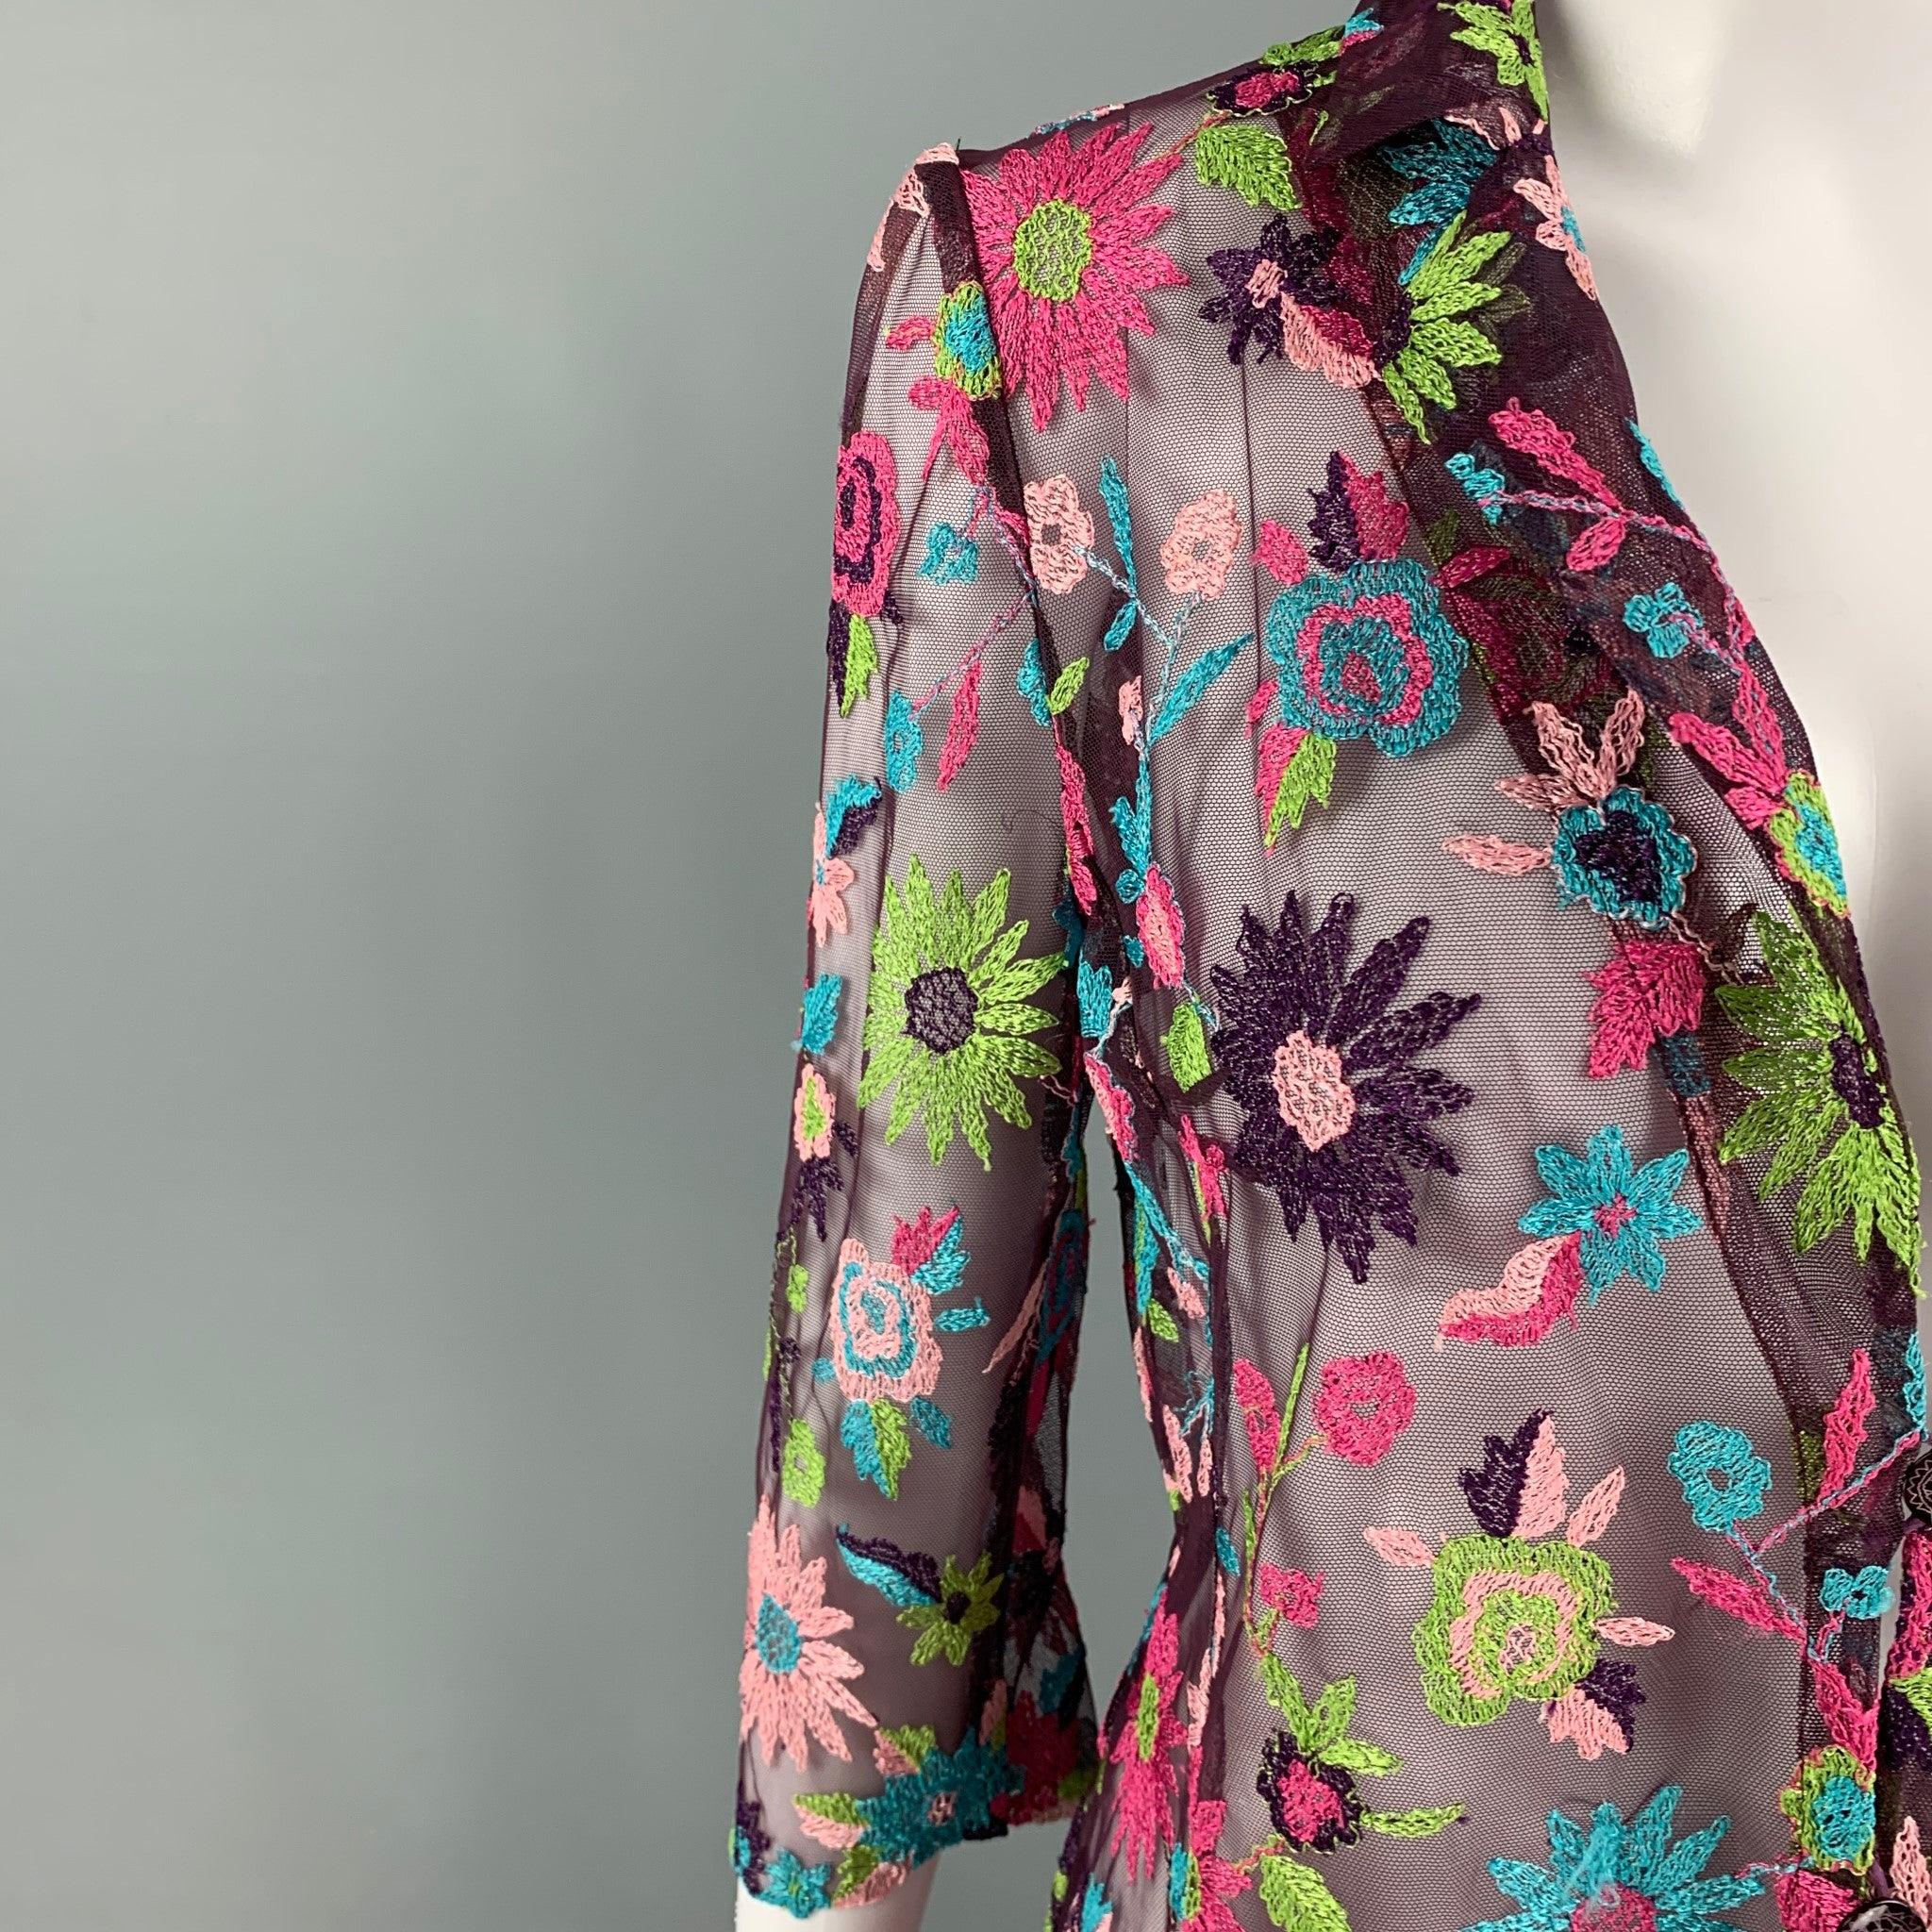 BAZAR by CHRISTIAN LACROIX top comes in a purple & multi-color see through rayon blend featuring floral embroidered designs throughout, notch lapel, and a buttoned closure. Made in France.Very Good
Pre-Owned Condition. 

Marked:   38 

Measurements: